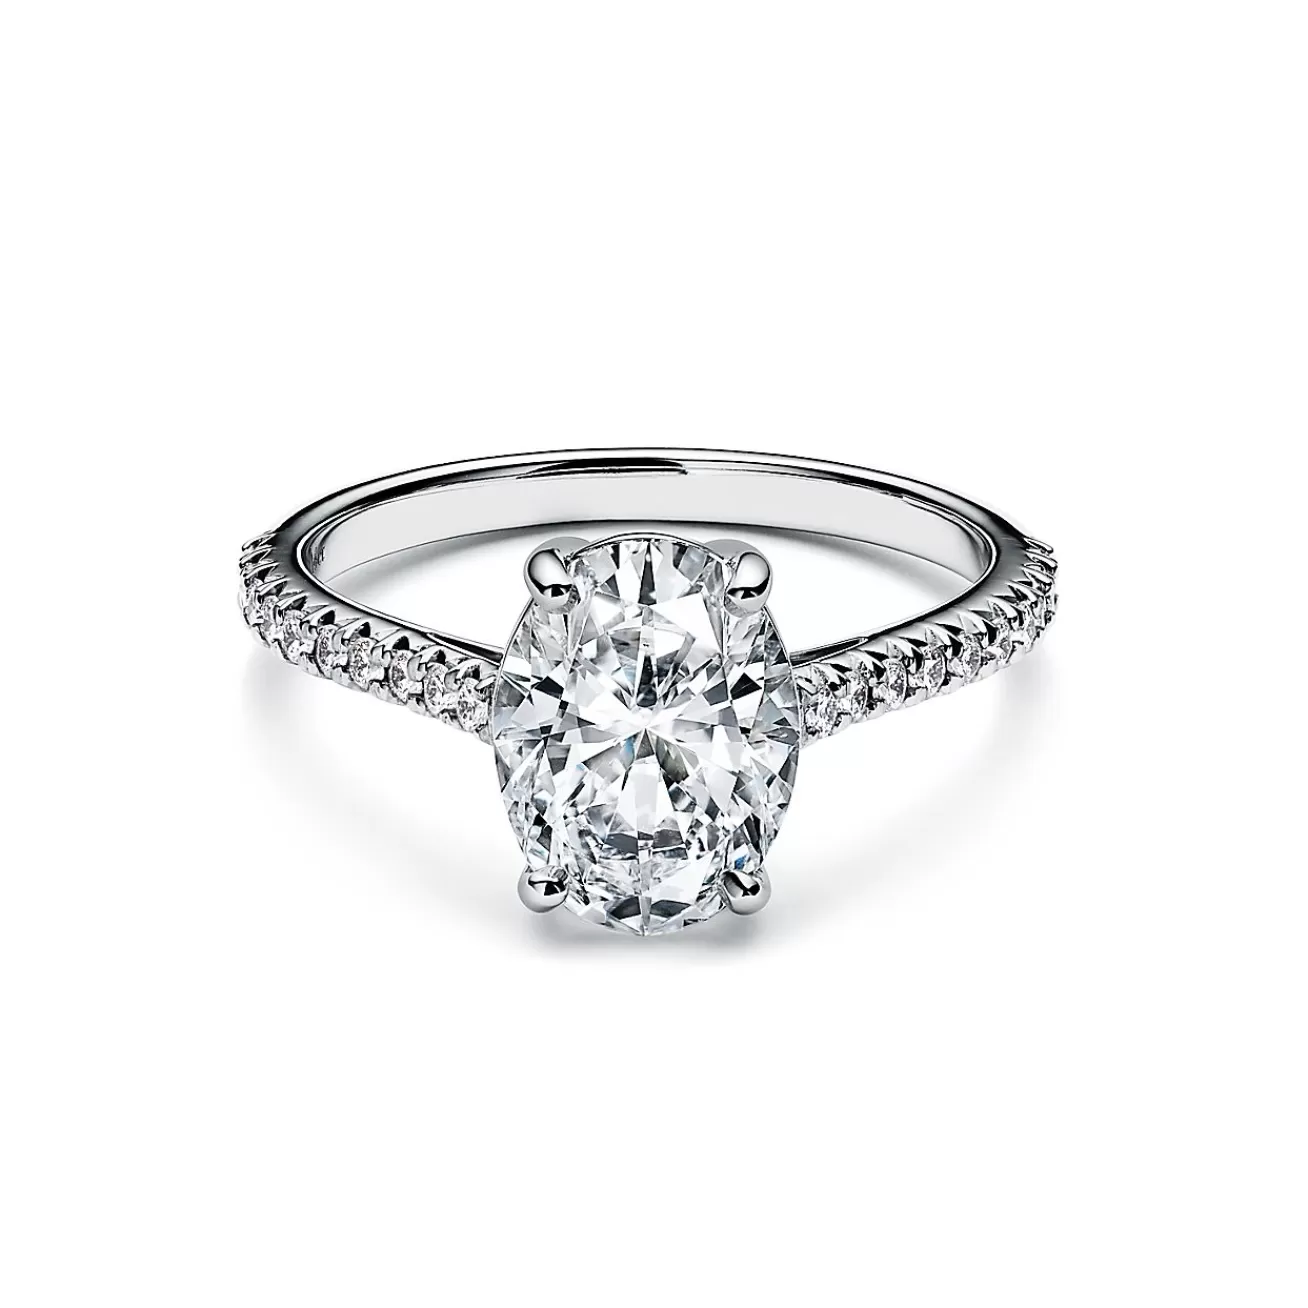 Tiffany & Co. Tiffany Novo® oval brilliant engagement ring with a pavé diamond platinum band. | ^ Engagement Rings